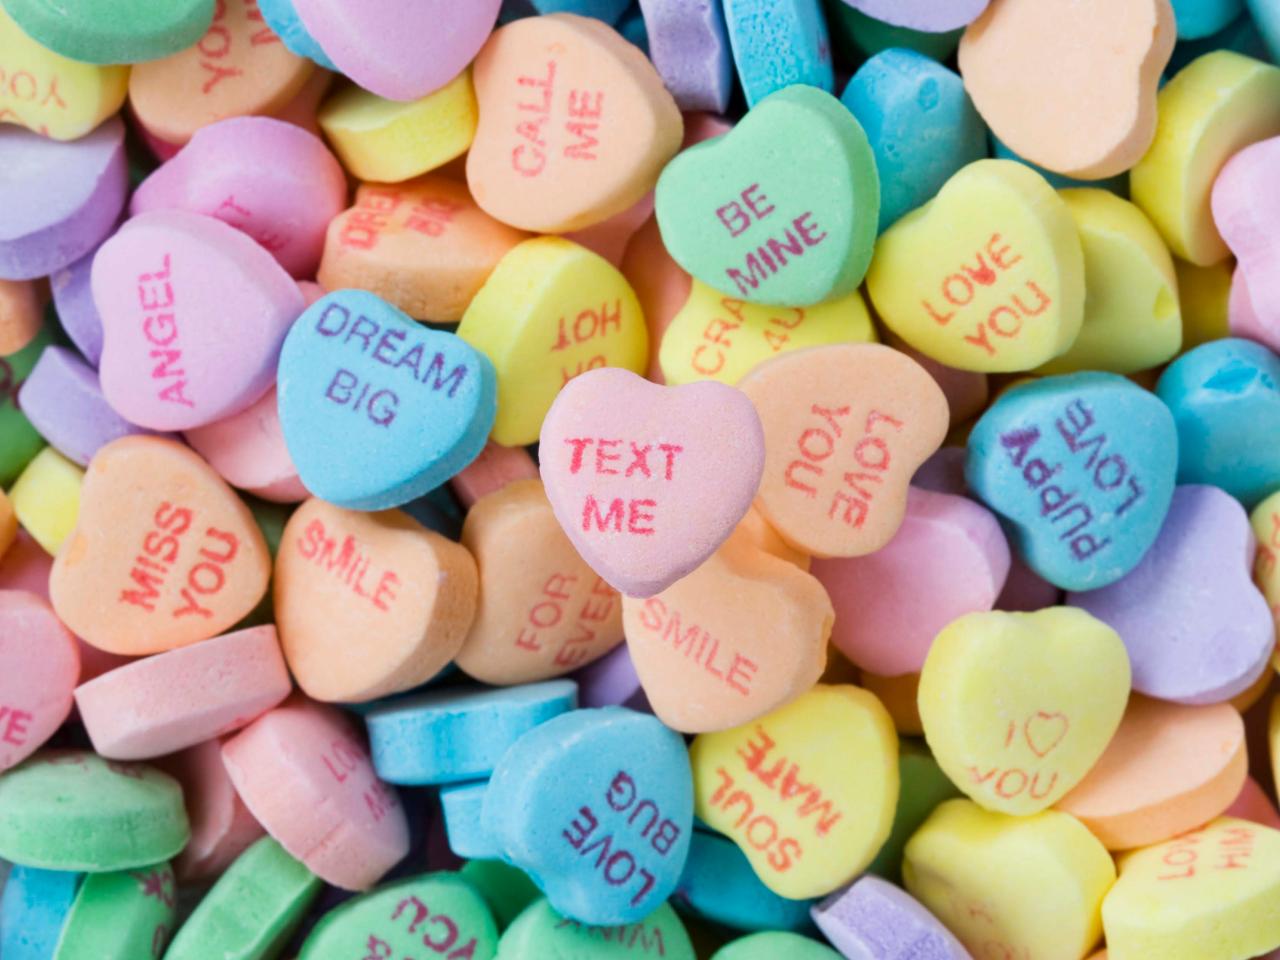 Sweethearts Conversation Hearts Are Back, But They're Not Very